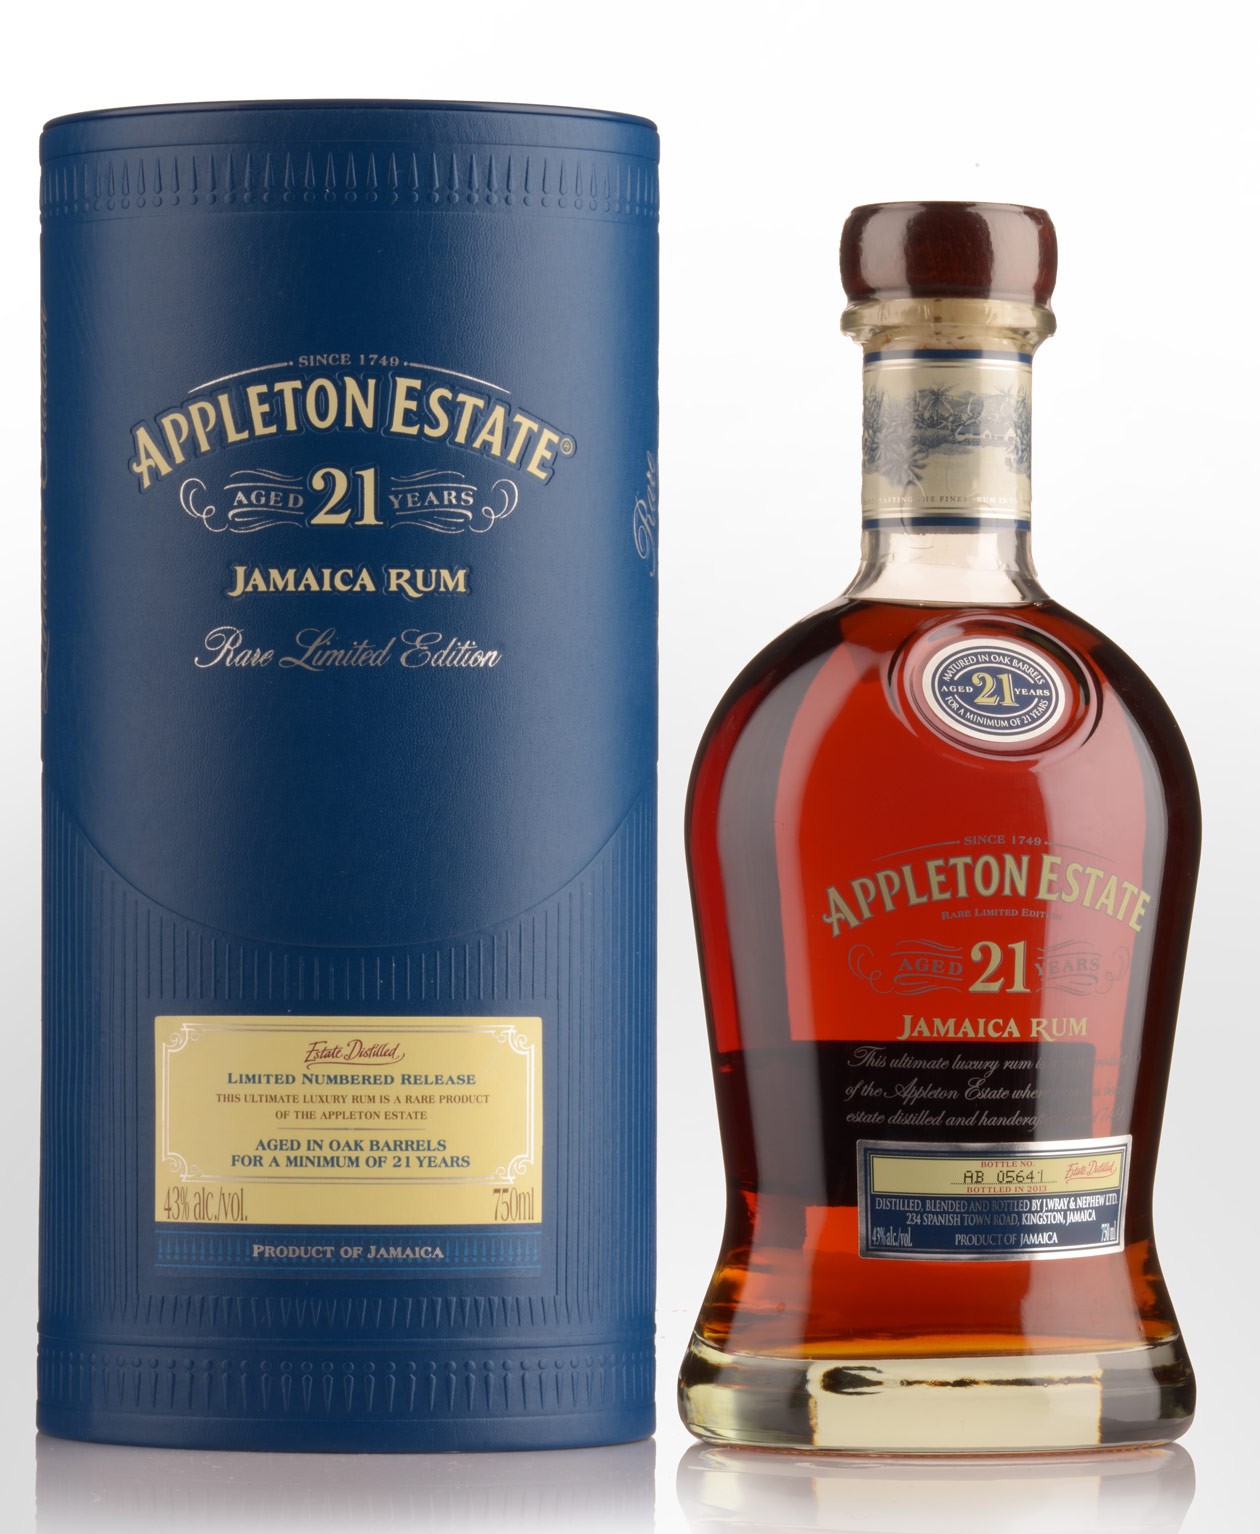 Appleton Estate Rare Limited Edition 21 Year Old Rum